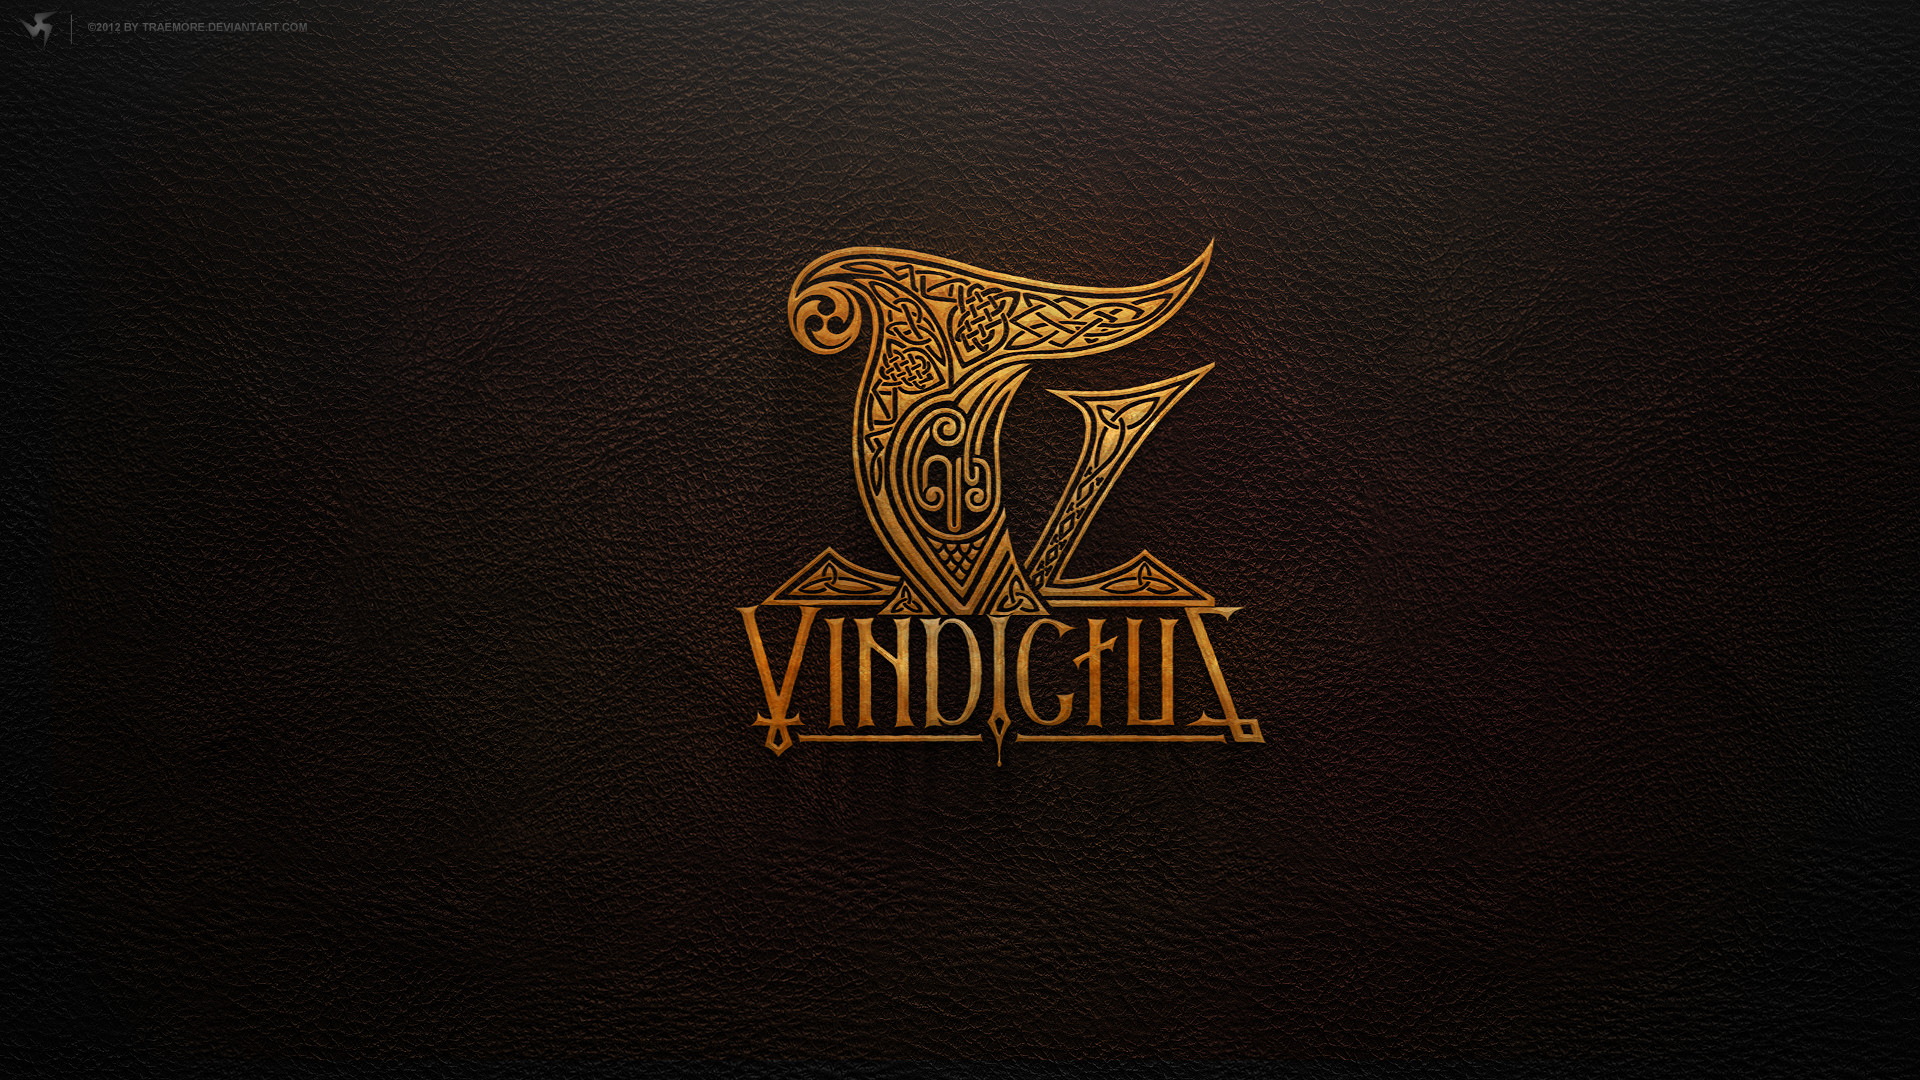 1920x1080 Vindictus Fanmade Wallpaper by TRAEMORE Vindictus Fanmade Wallpaper by  TRAEMORE